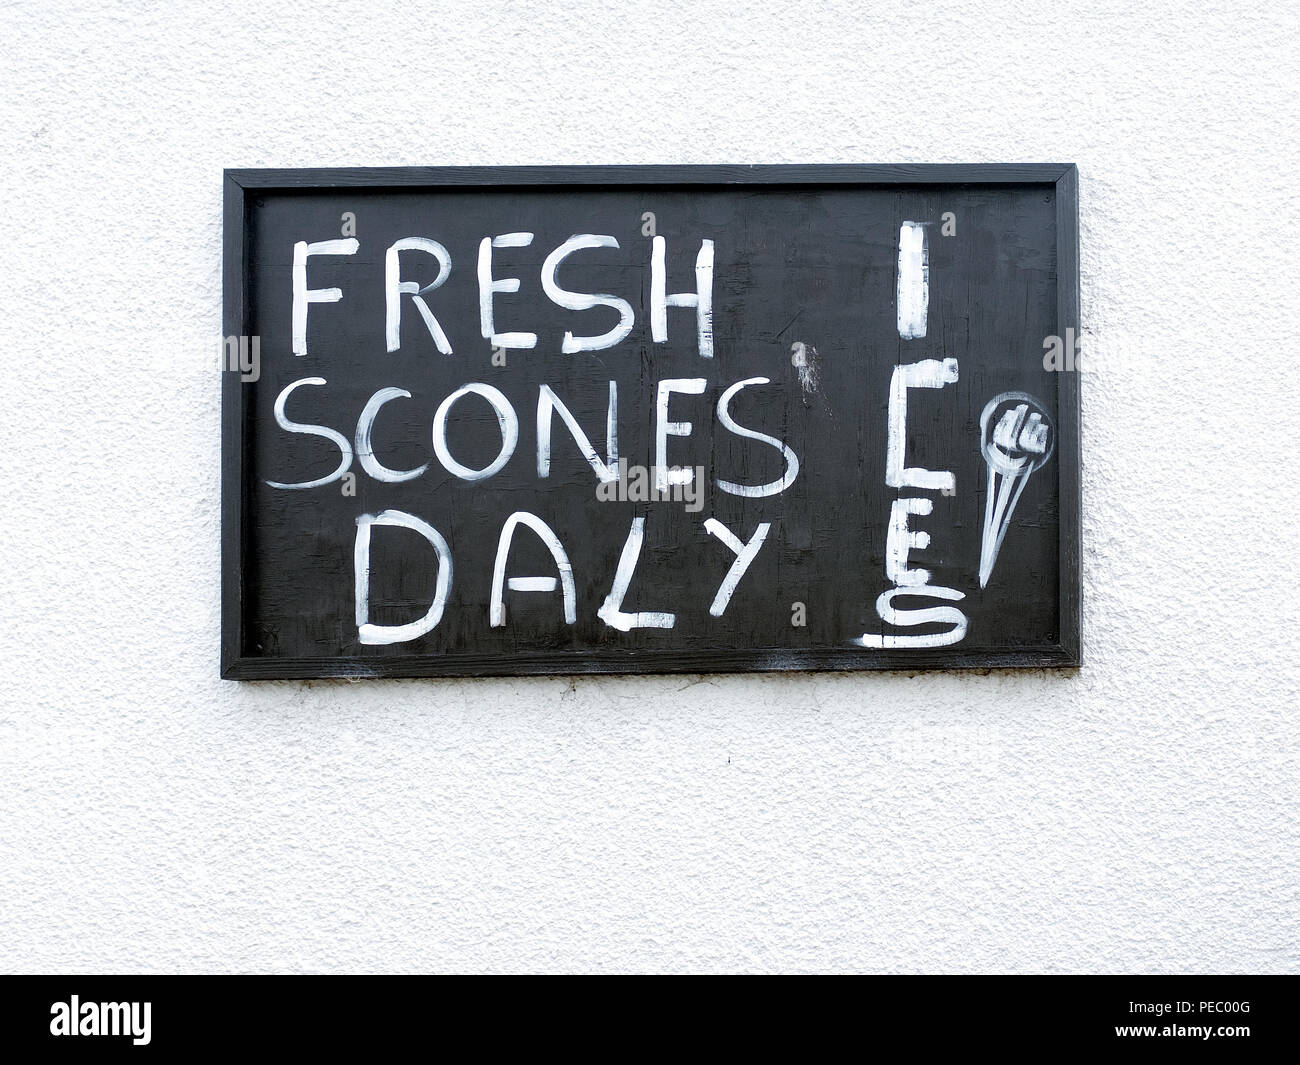 Misspelling of sign - Fresh Scones Daily in Appleby in Westmorland, Cumbria, England, United Kingdom. Stock Photo